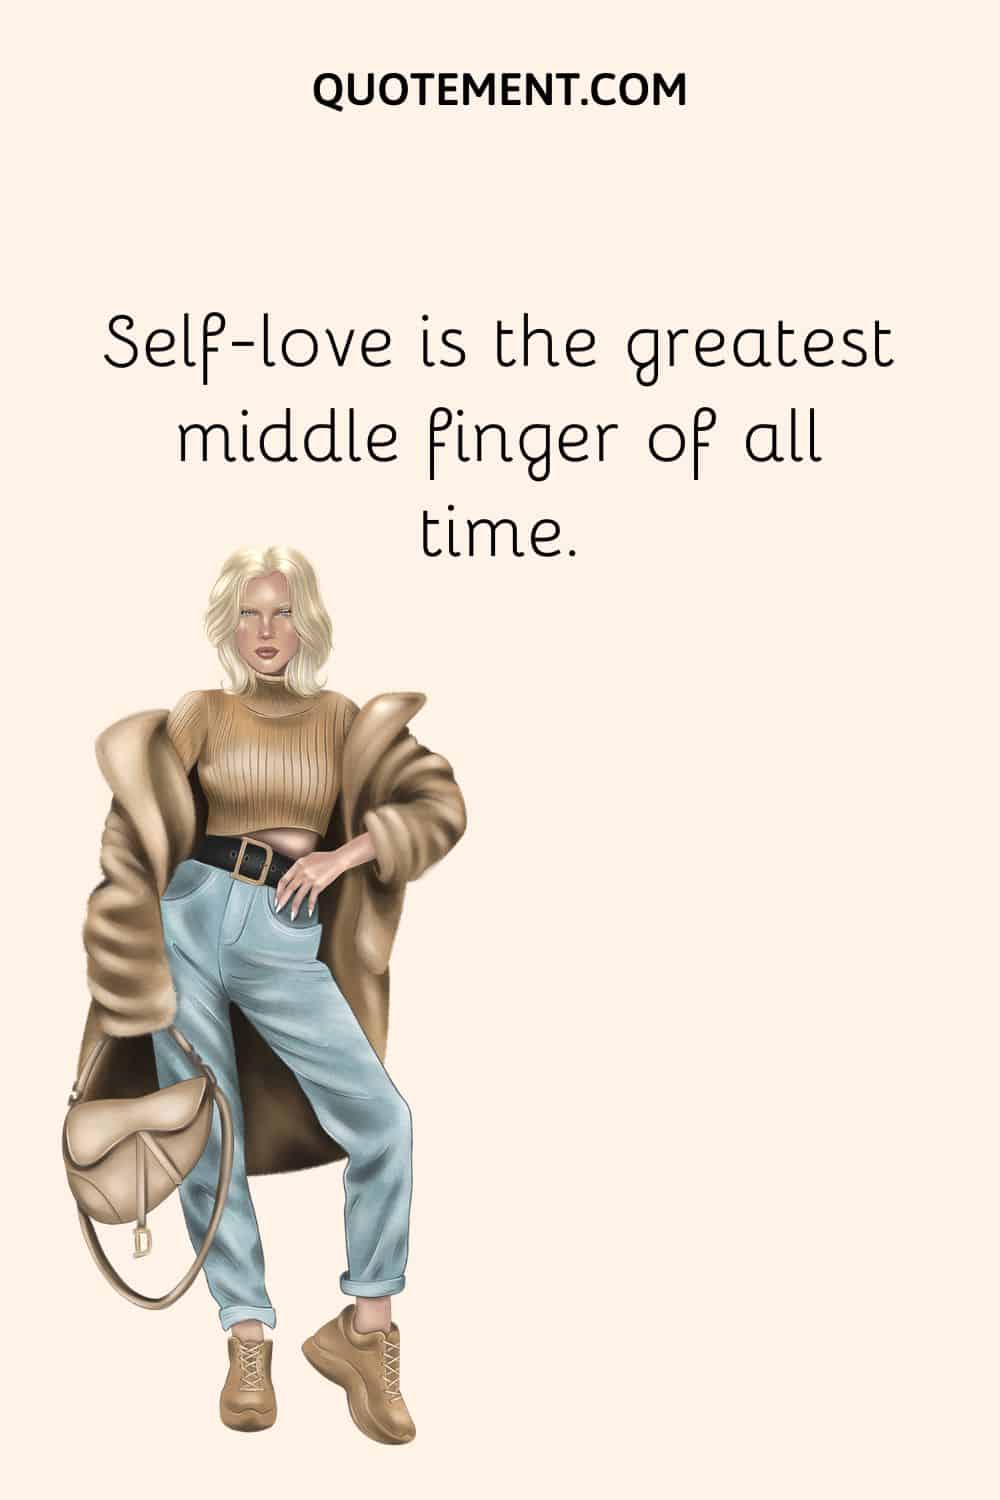 Self-love is the greatest middle finger of all time